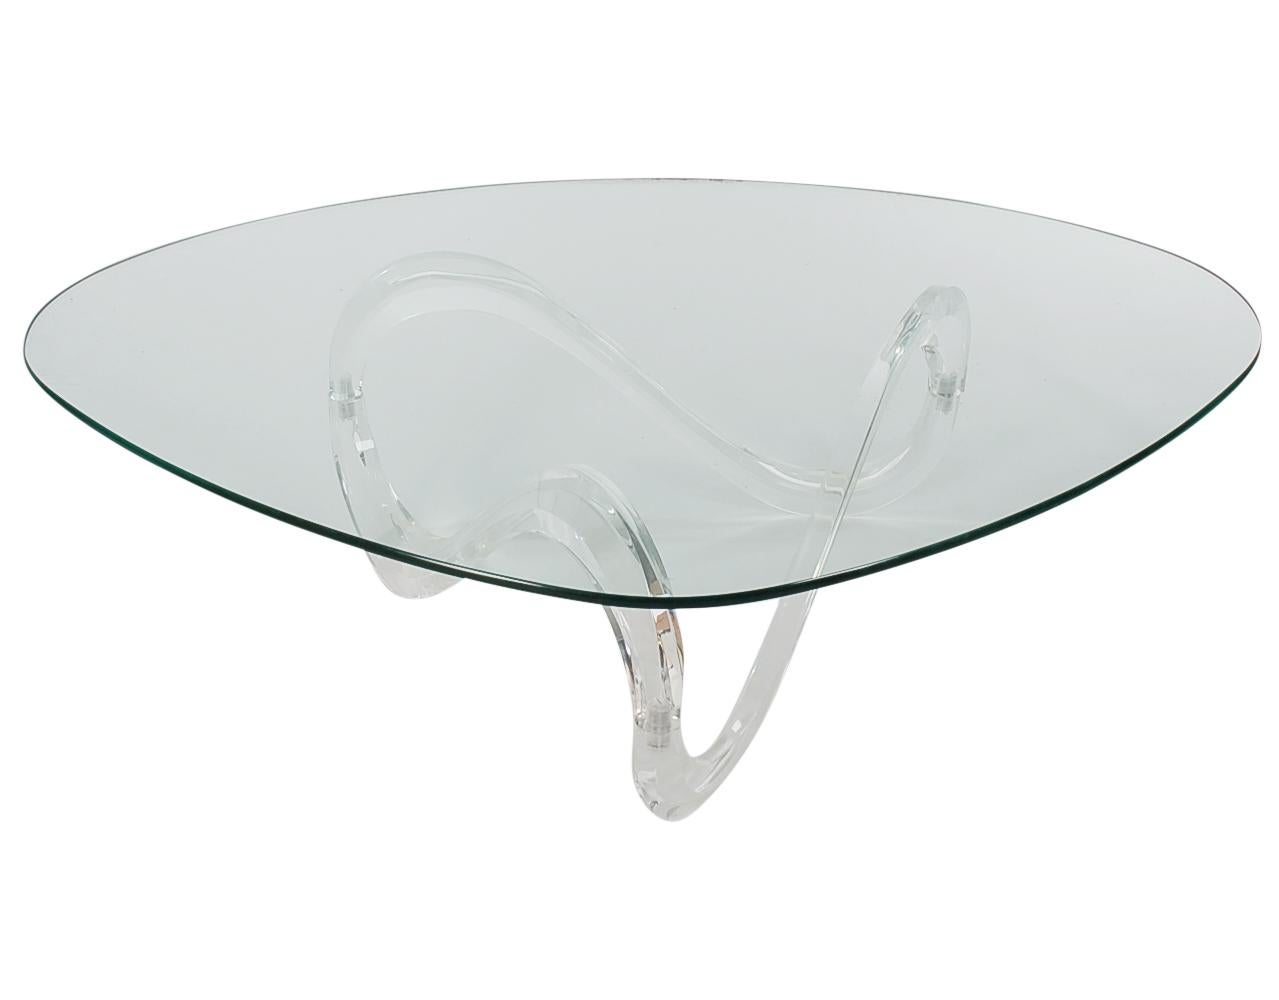 An incredible conversation piece designed by Knut Hesterberg. This model was manufactured in the 1970s. It features a thick continuous Lucite form base with a rounded edge triangular shaped glass top.